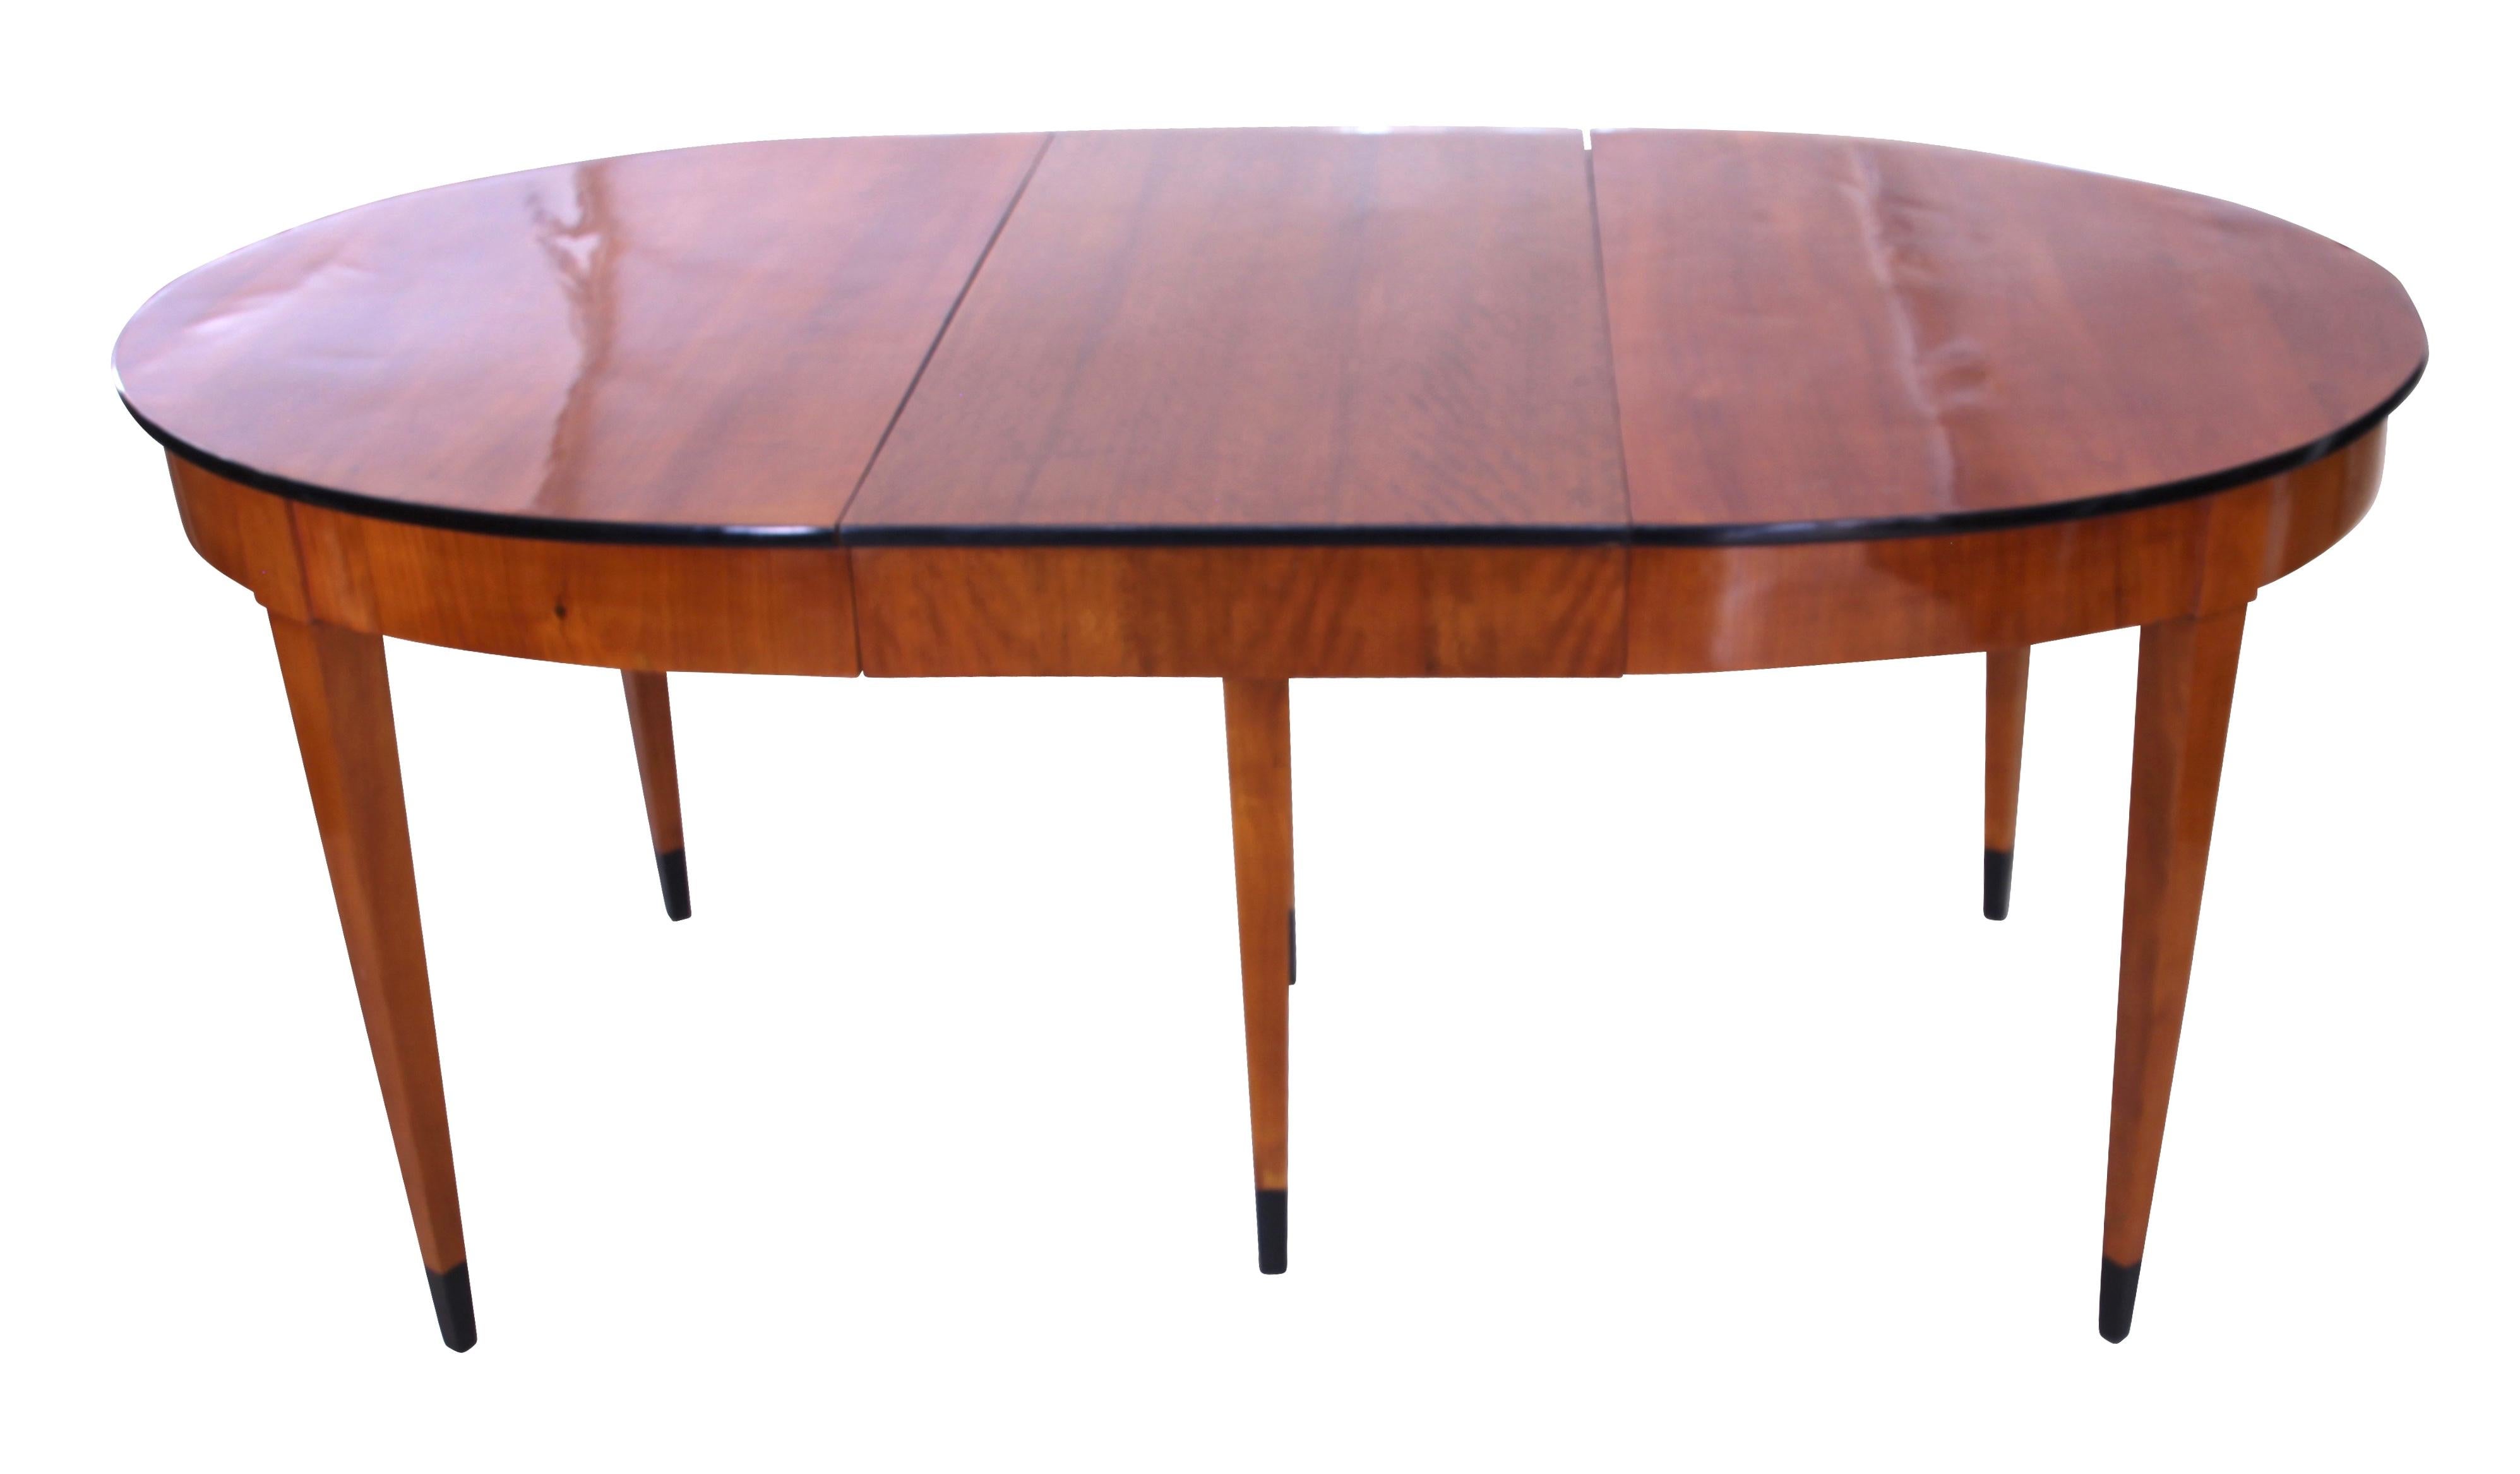 Beautiful, plain and early Biedermeier expandable table from Southwest Germany/France, circa 1820.

The table has a great measure with its width of 108 cm/3' 6.5